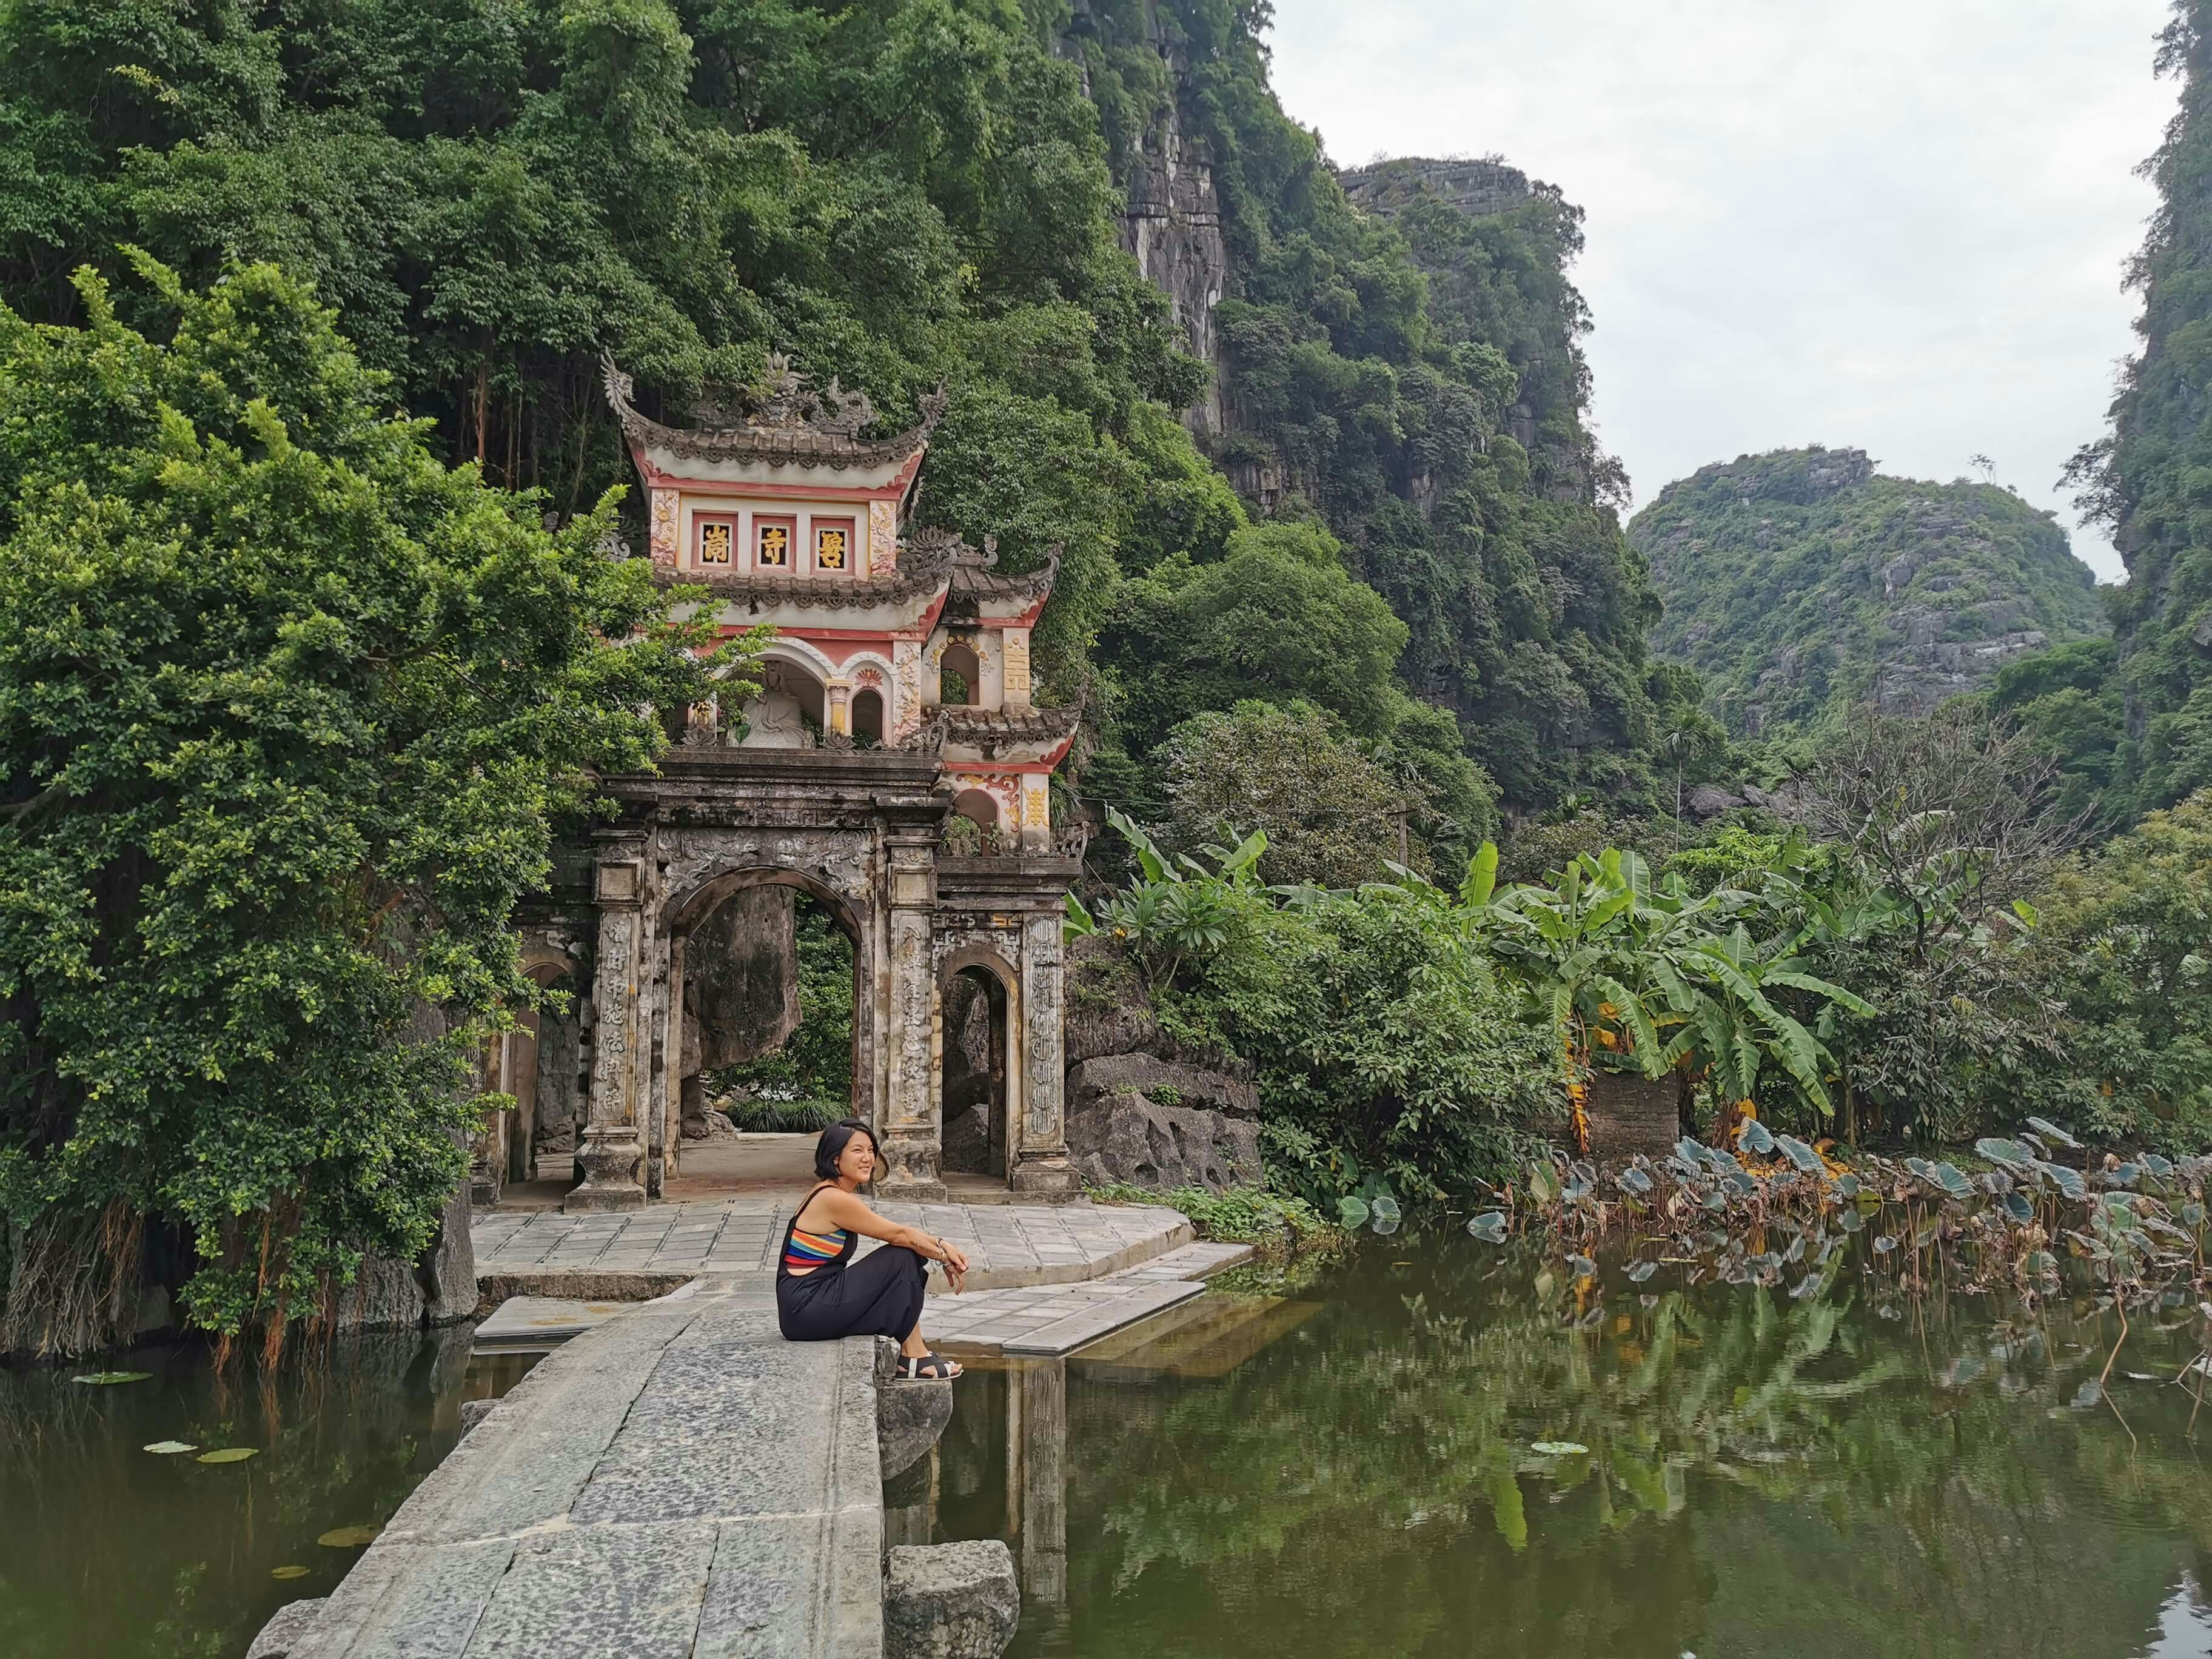 The writer, a young woman, sits on a boardwalk overlooking a river. There is a lush jungle and the remains of a temple gate in the background.